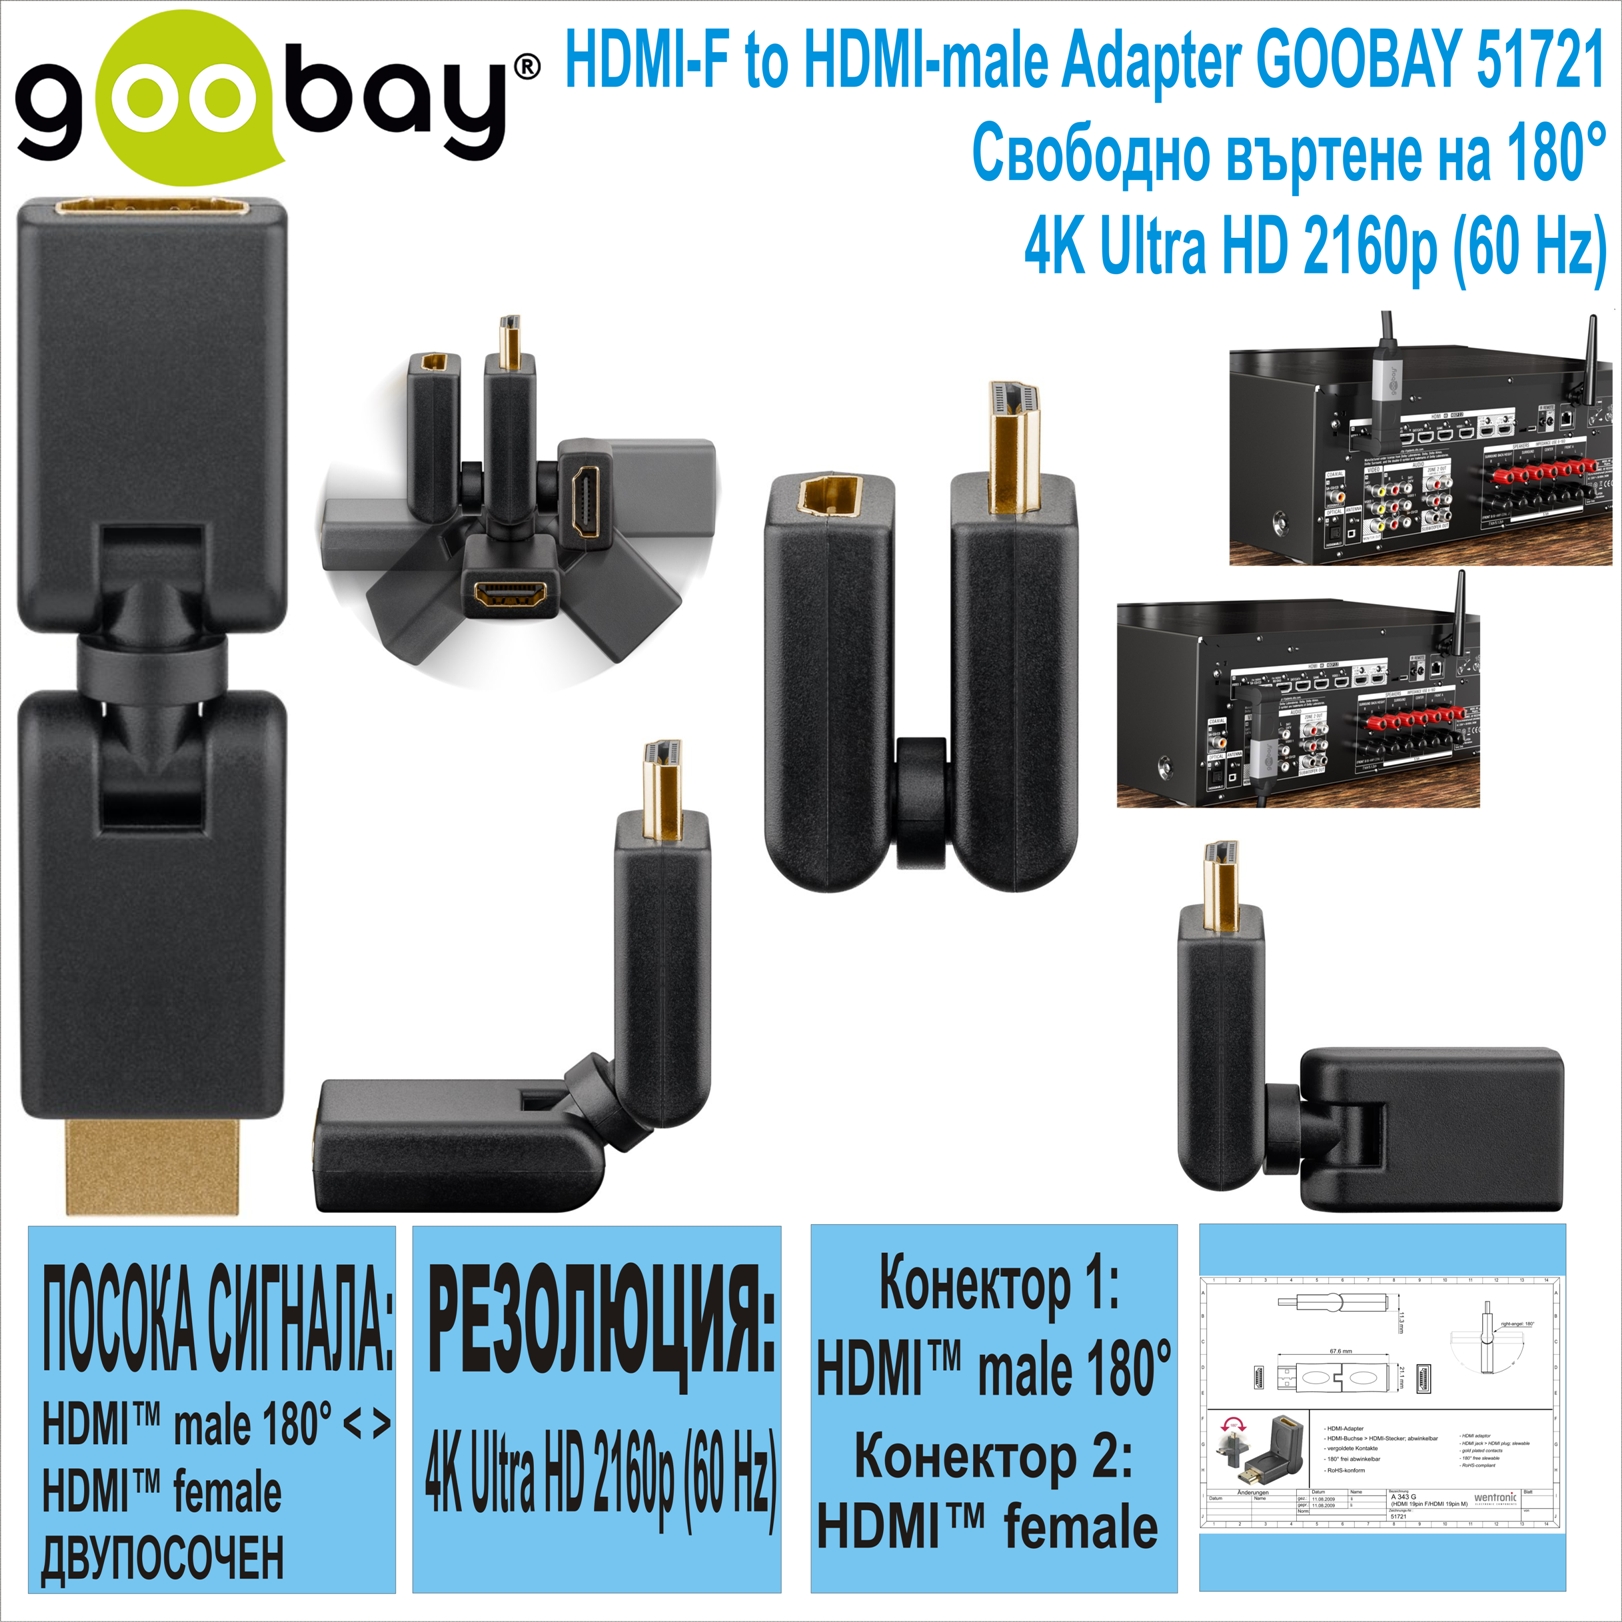 HDMI-F to HDMI-male 180° Adapter GOOBAY 51721